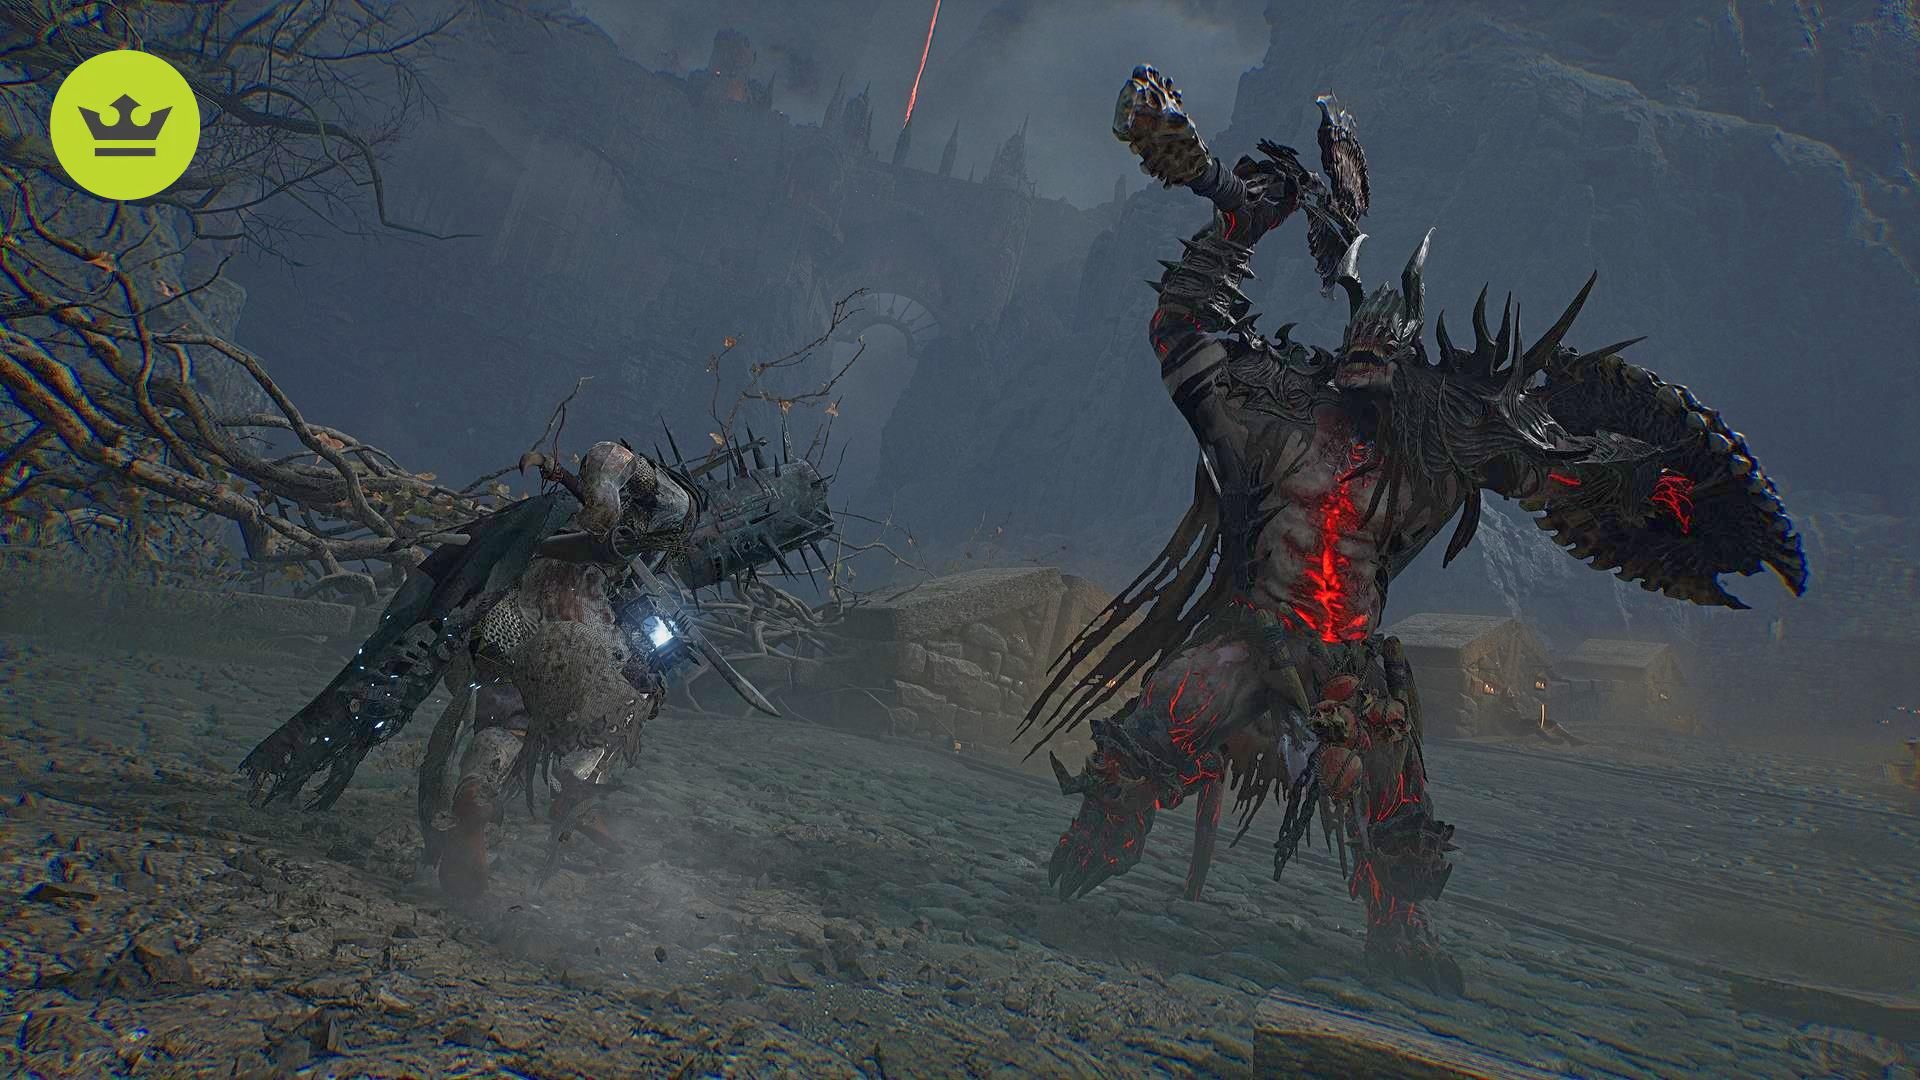 Lords of the Fallen: Every boss in order